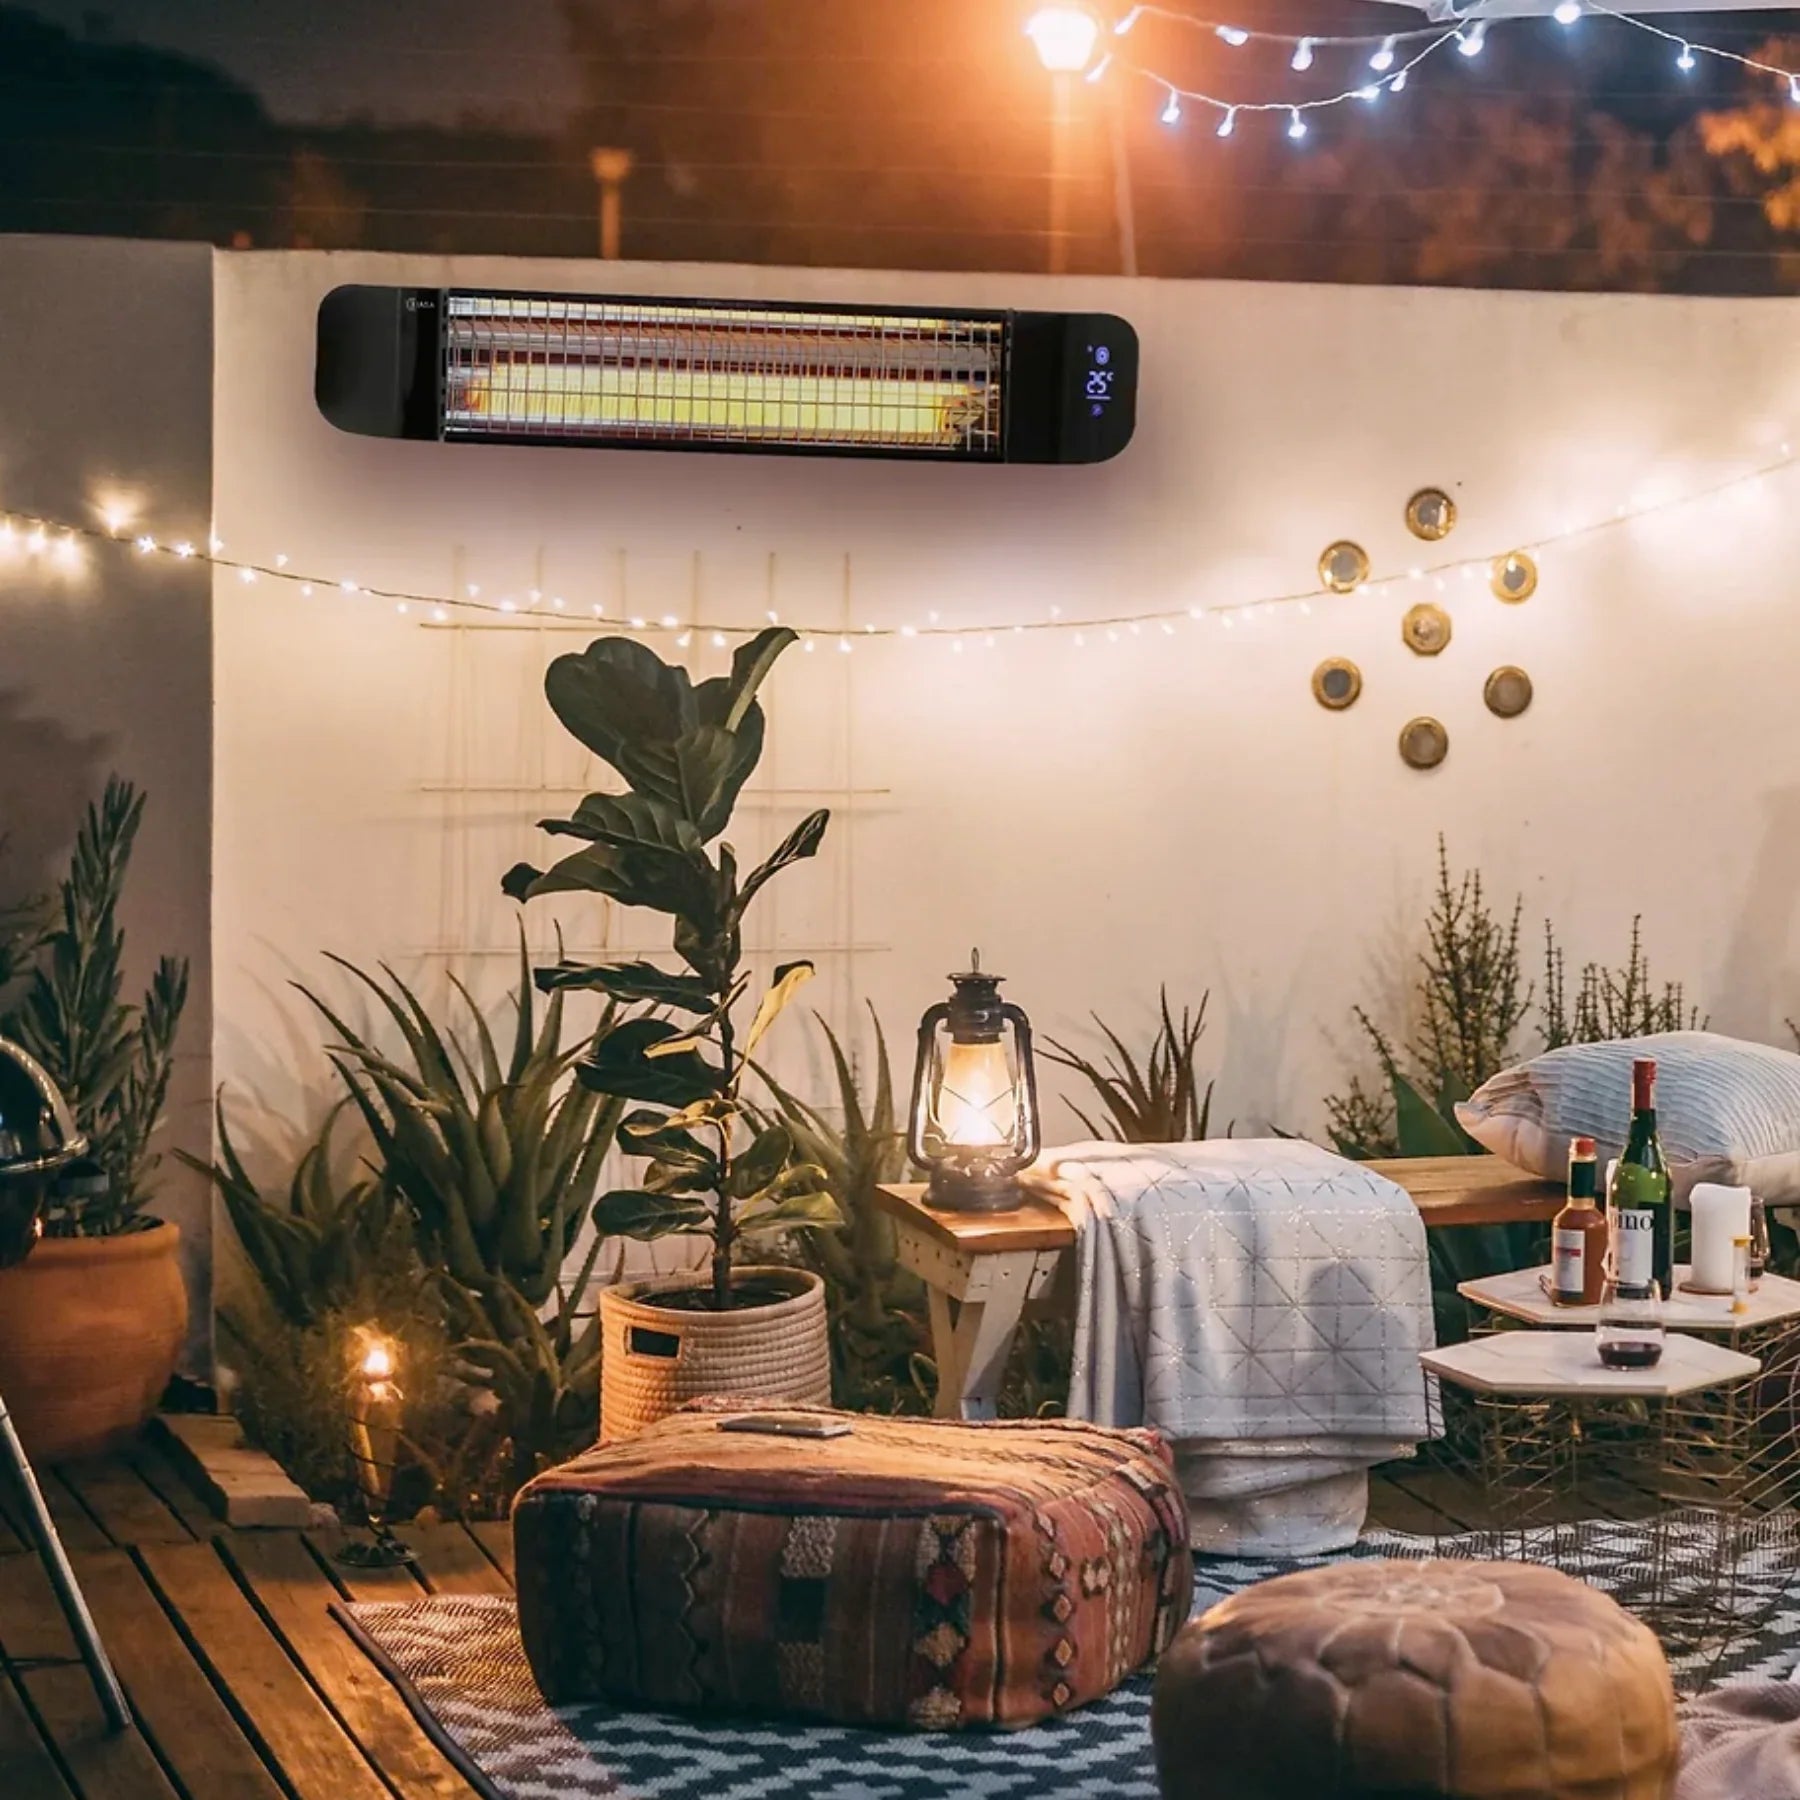 Patio heater bar in a living room